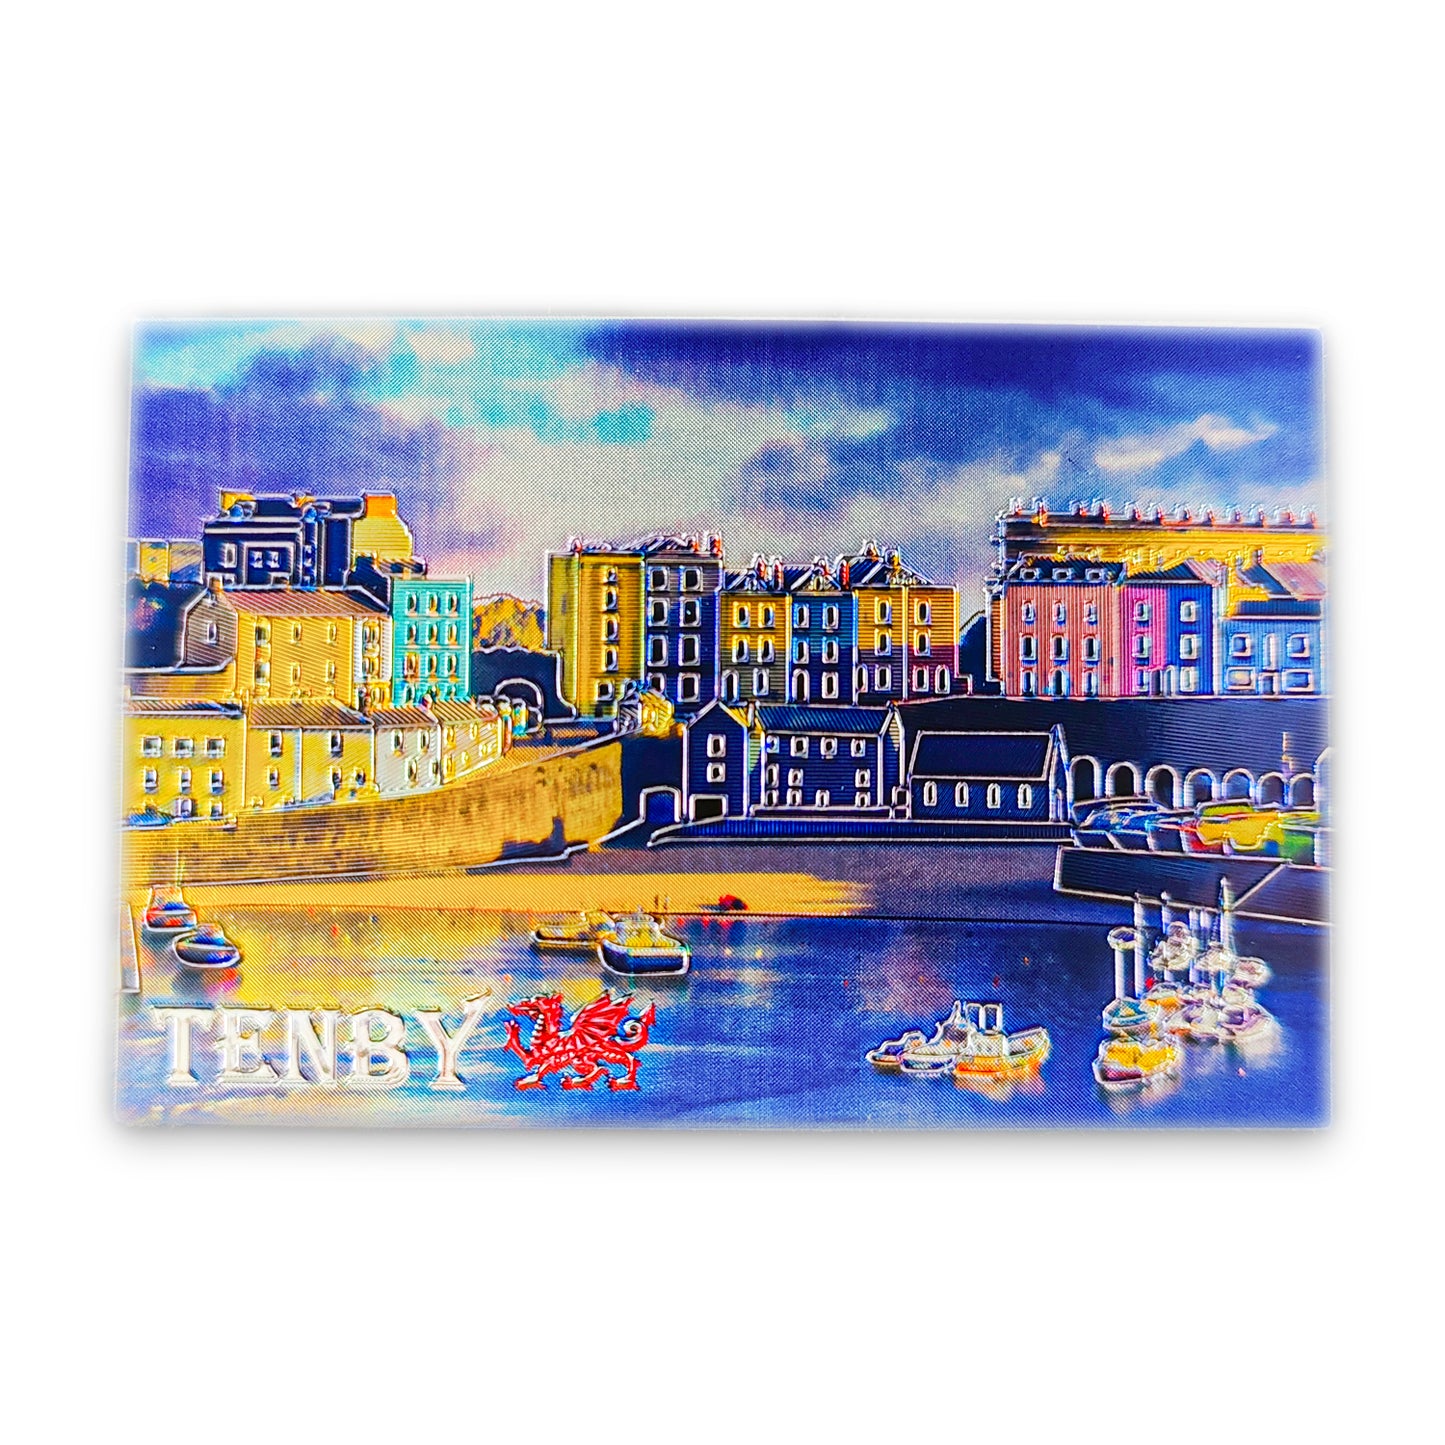 Tenby Colourful View Magnet (MGF024)